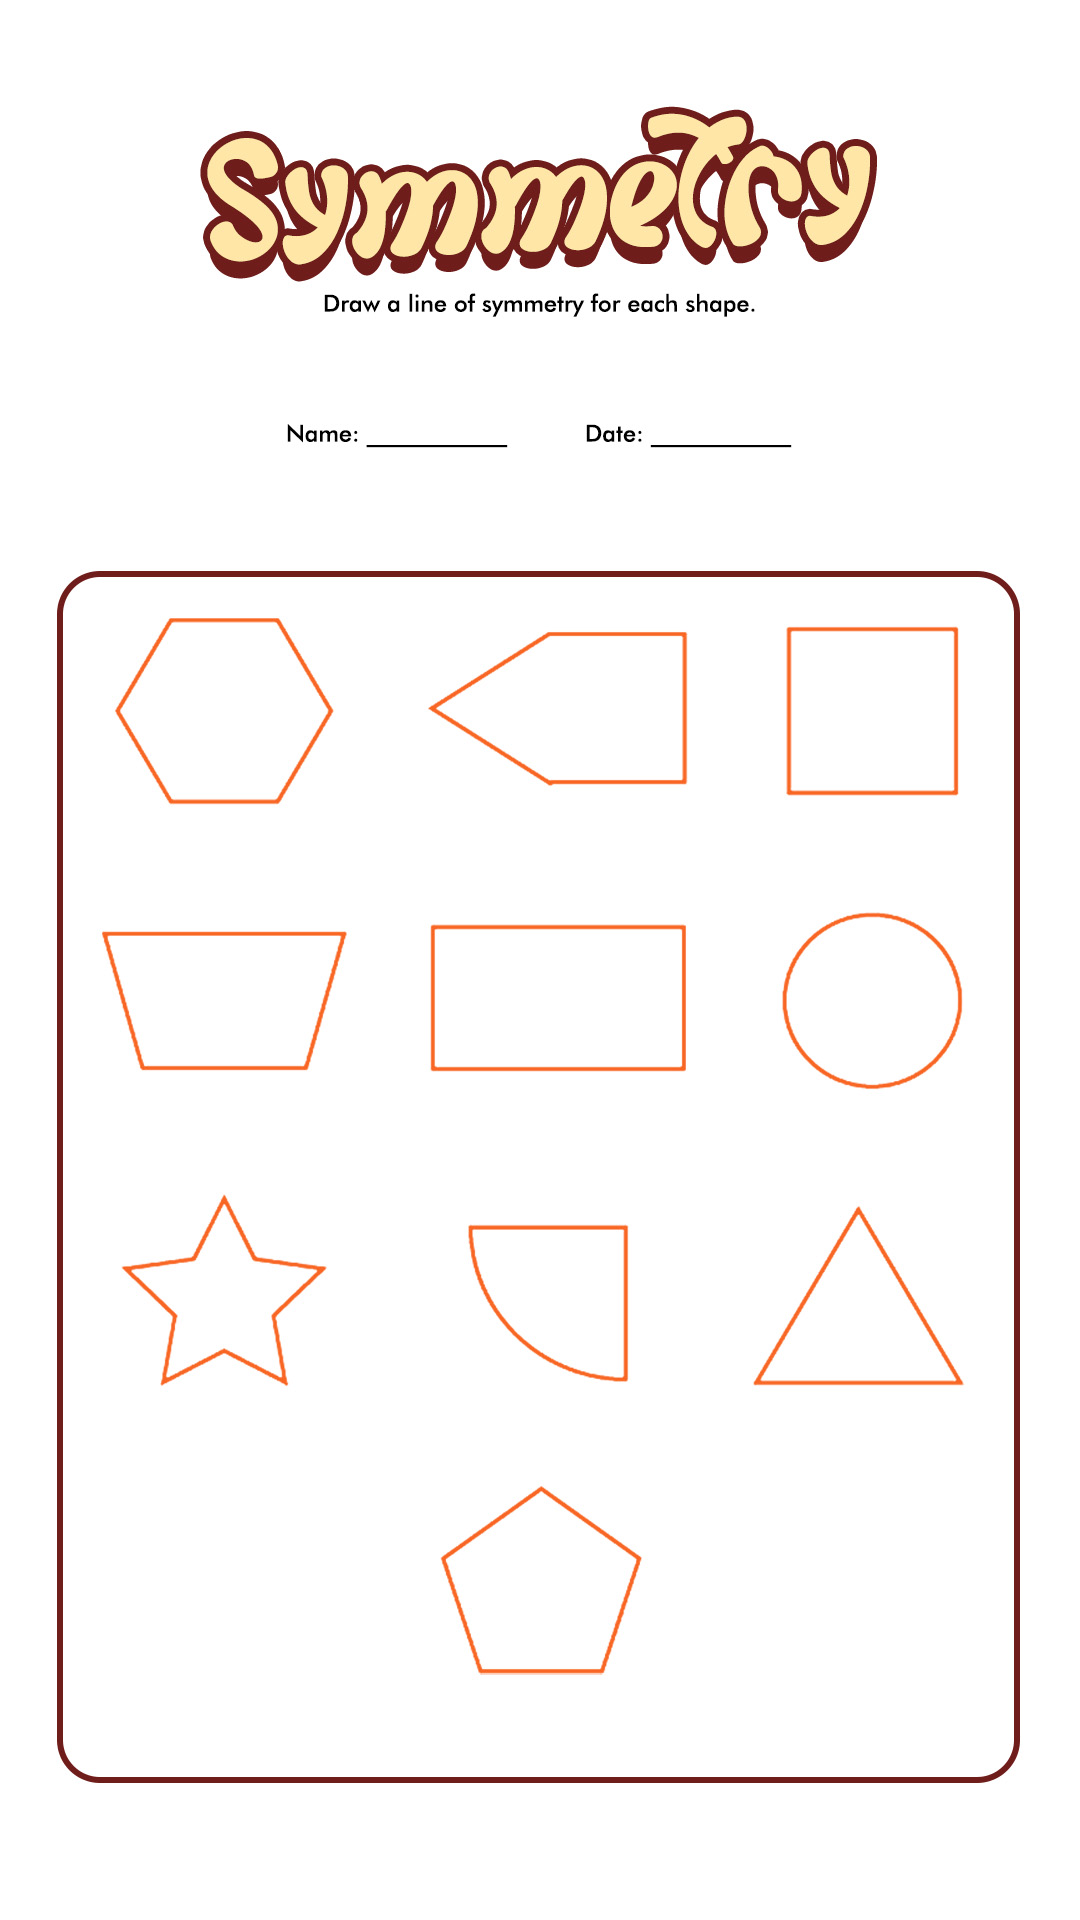 Drawing Lines of Symmetry Worksheet for 4th Grade Image